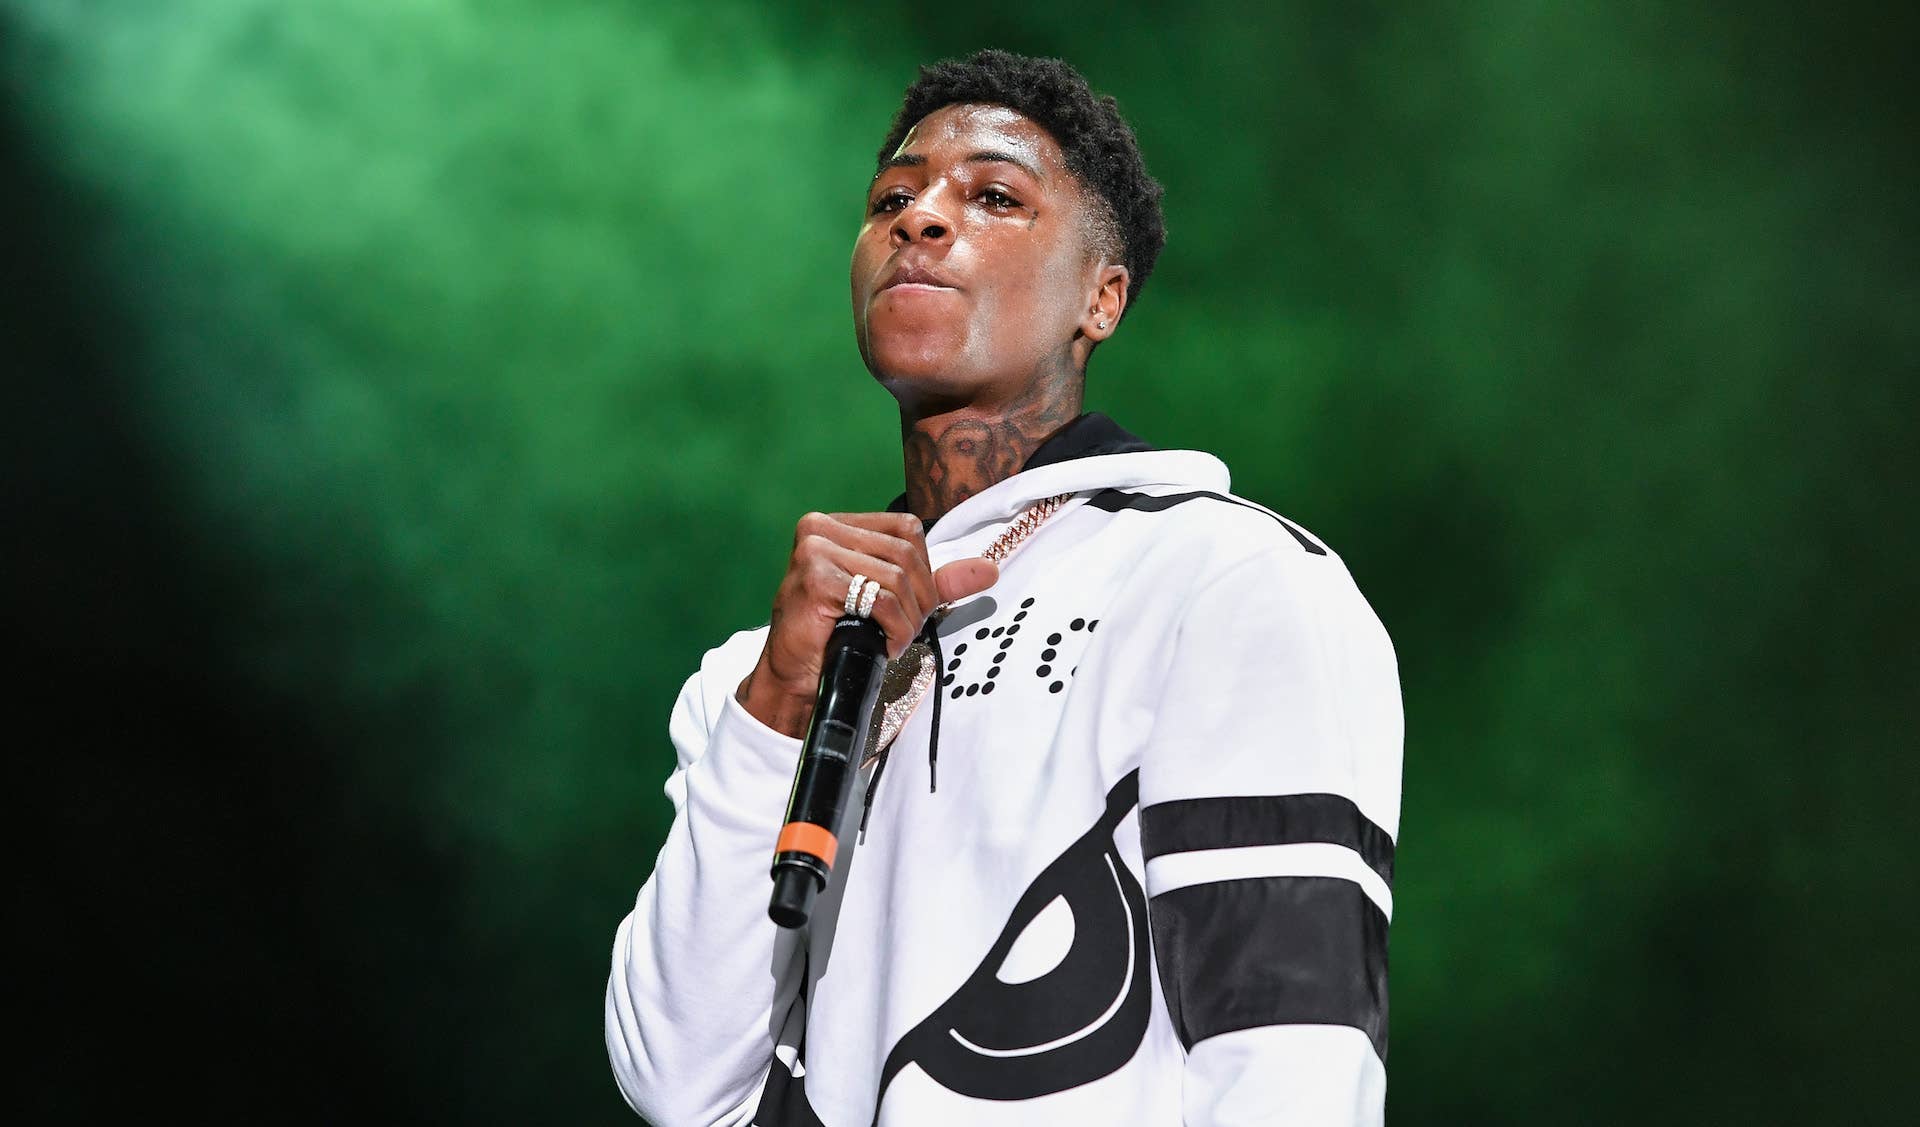 YoungBoy Never Broke Again performs at LilWeezyAna